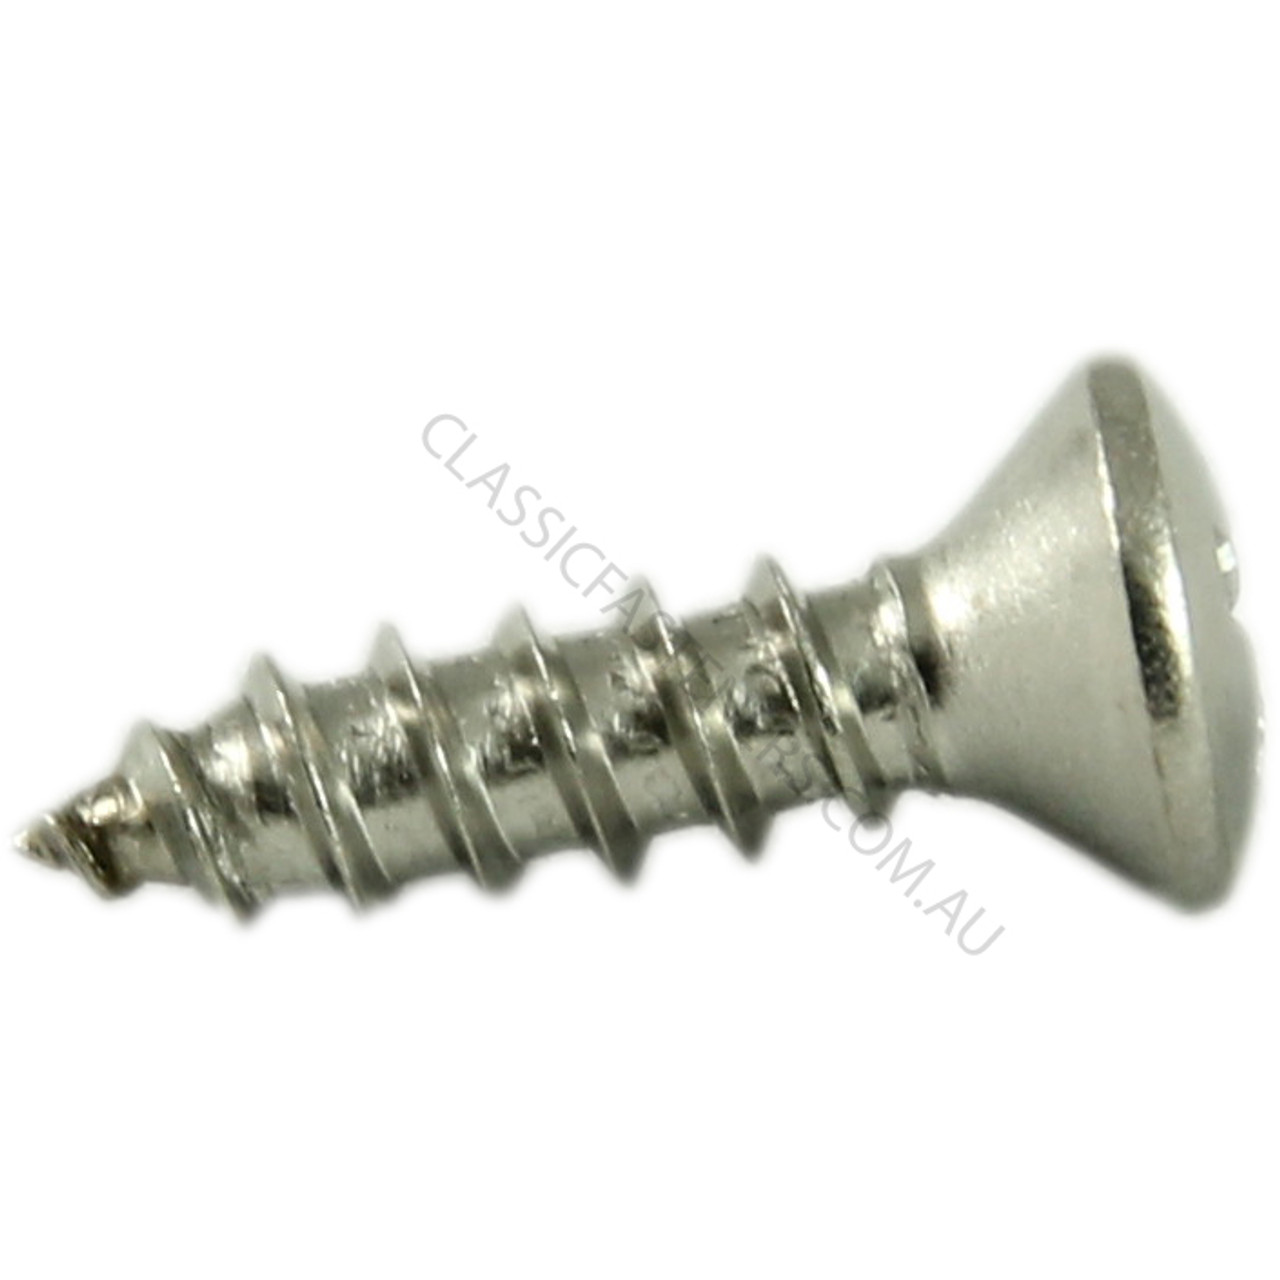 Raised Oval Head Phillips Stainless Self Tapping Screw (sheet metal screw)